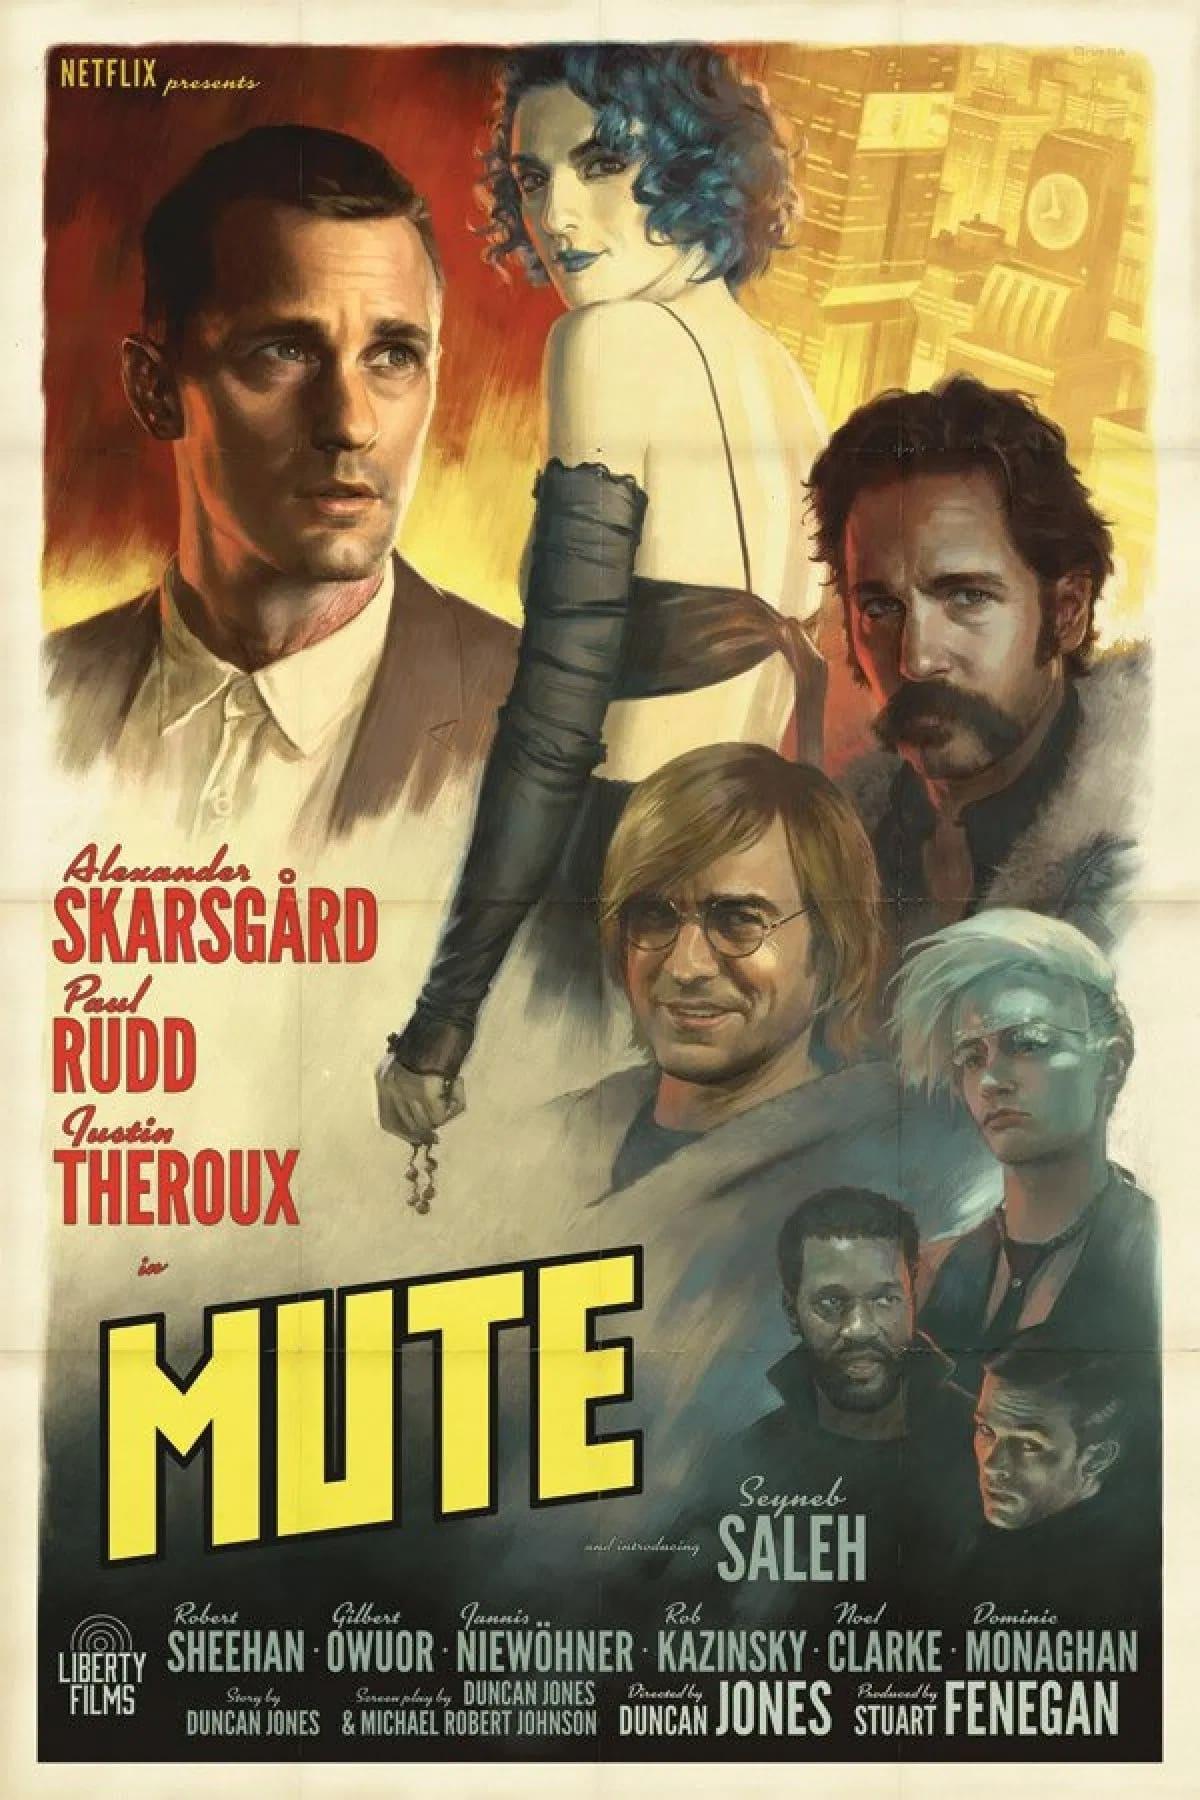 Mute poster